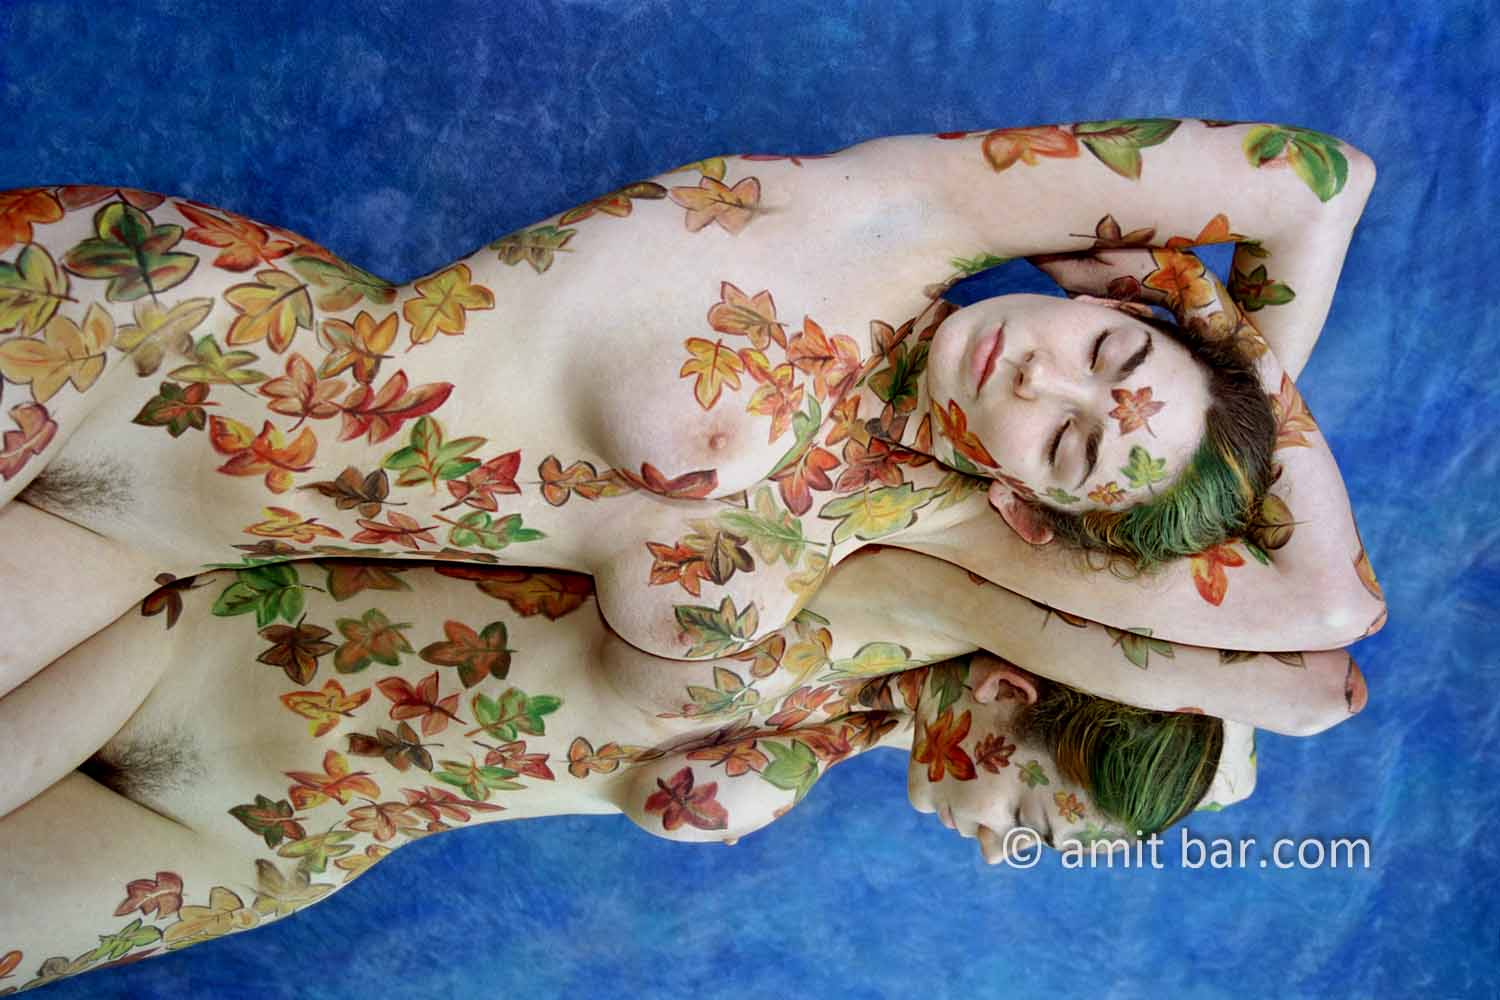 Autumn leaves body-painting II: Body-painted model with autumn leaves